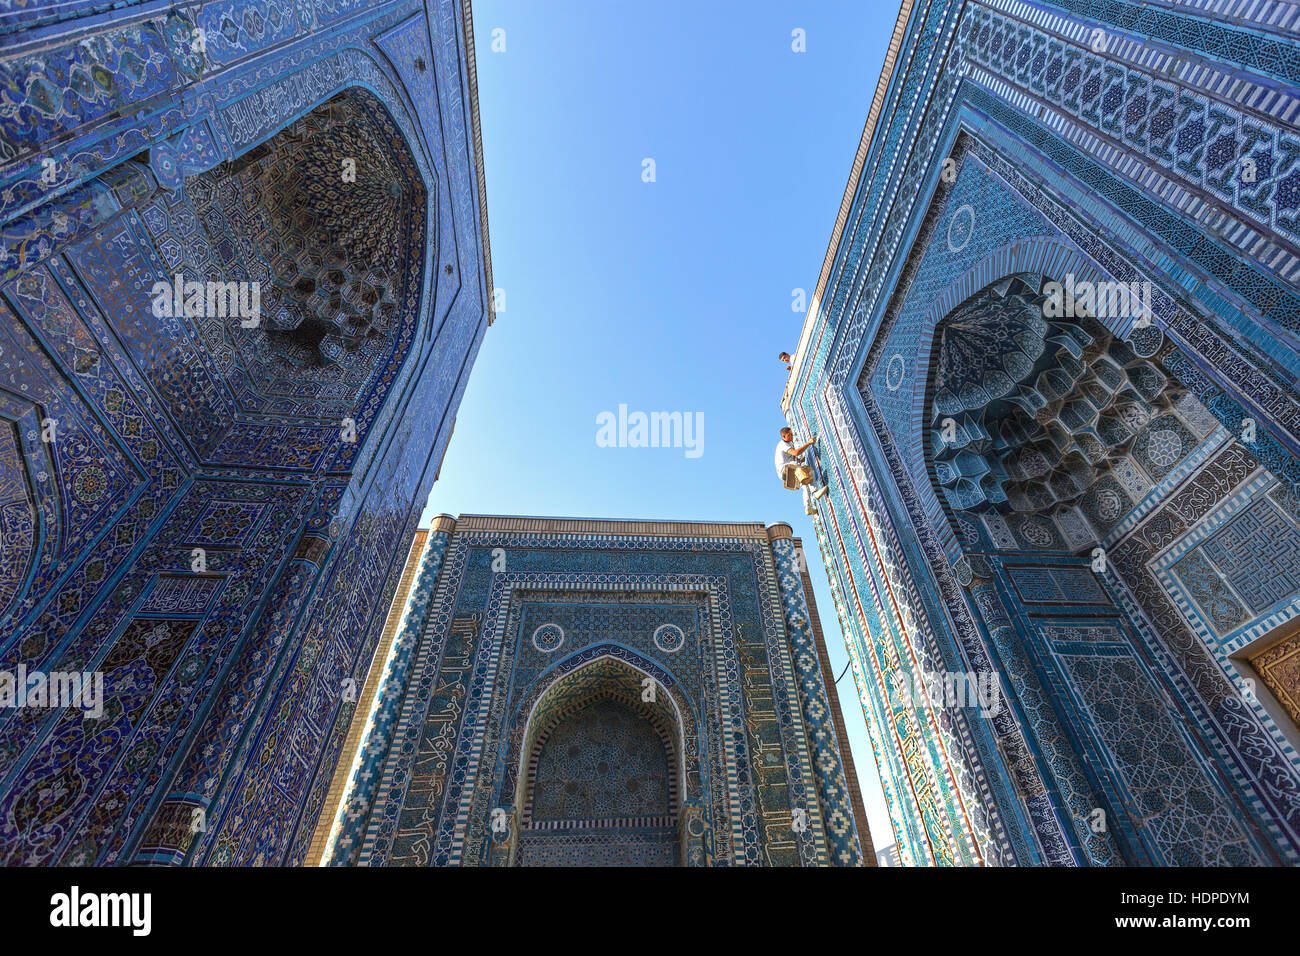 Restoring the tiles of the monumental gates of the mausoleums in the holy cemetery of Shakhi Zinda in Samarkand, Uzbekistan. Stock Photo